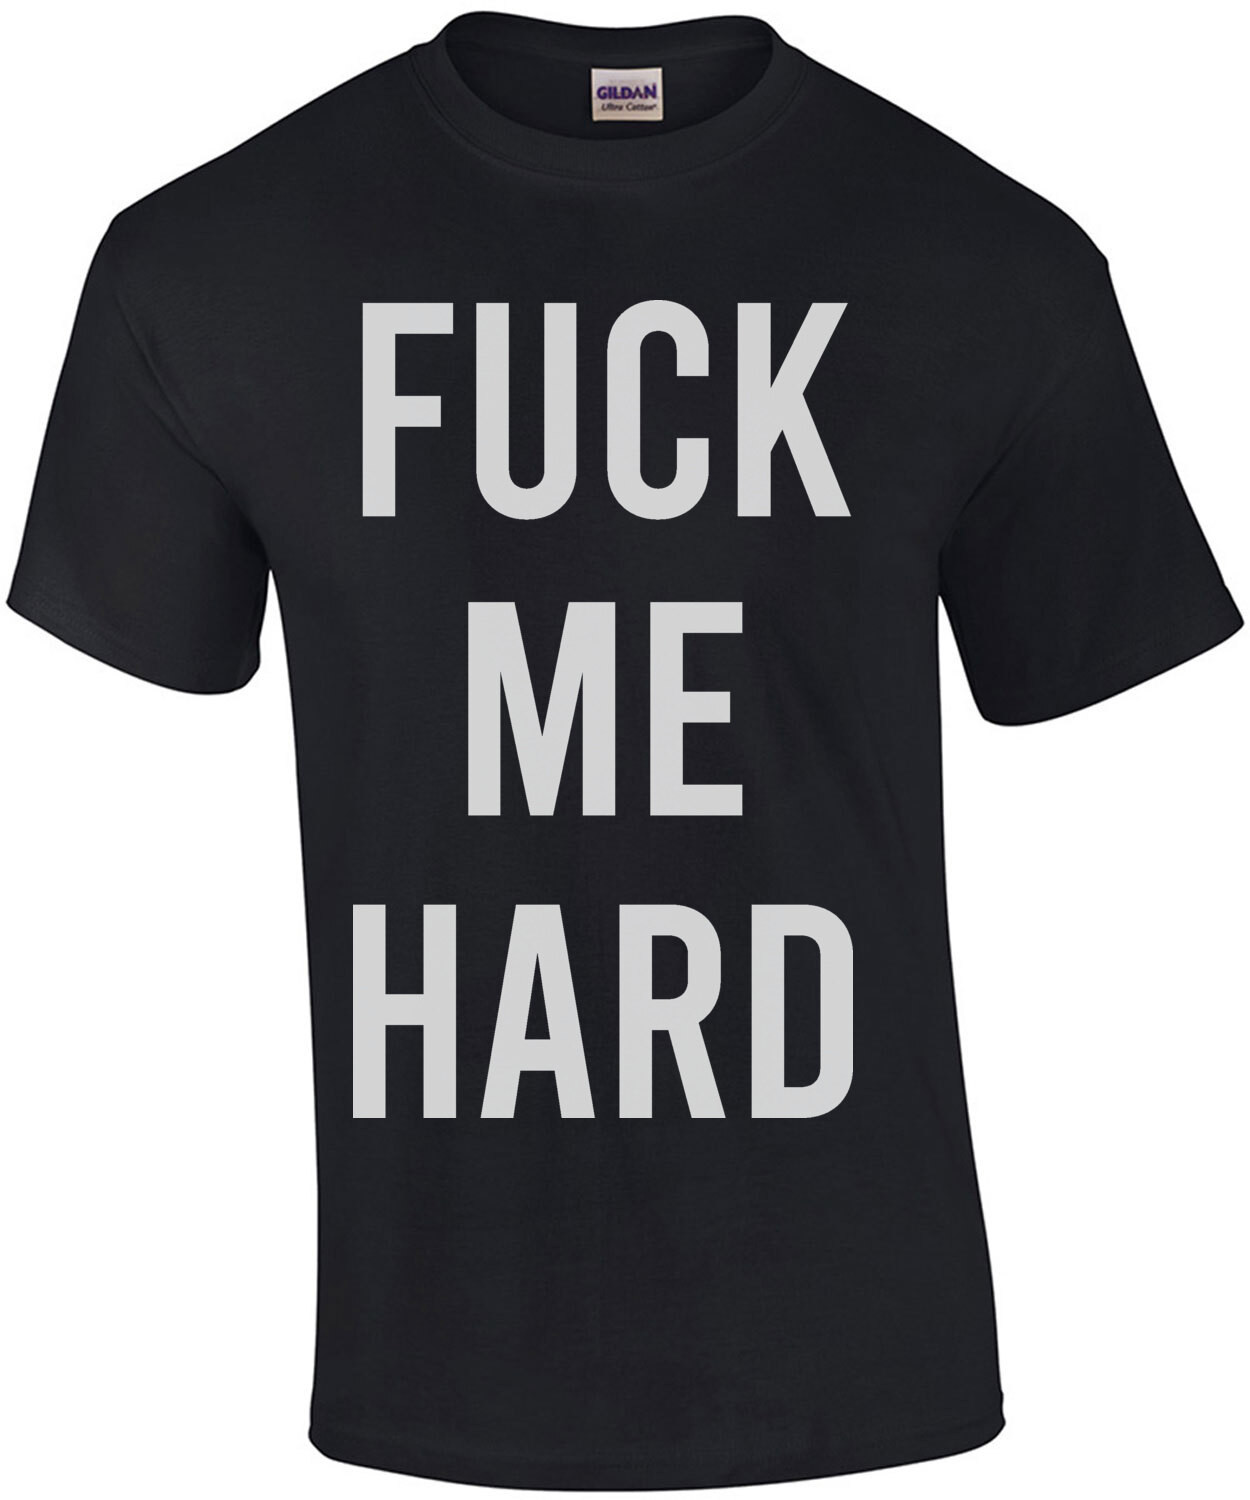 Fuck Me Hard - Sexual Offensive T-Shirt